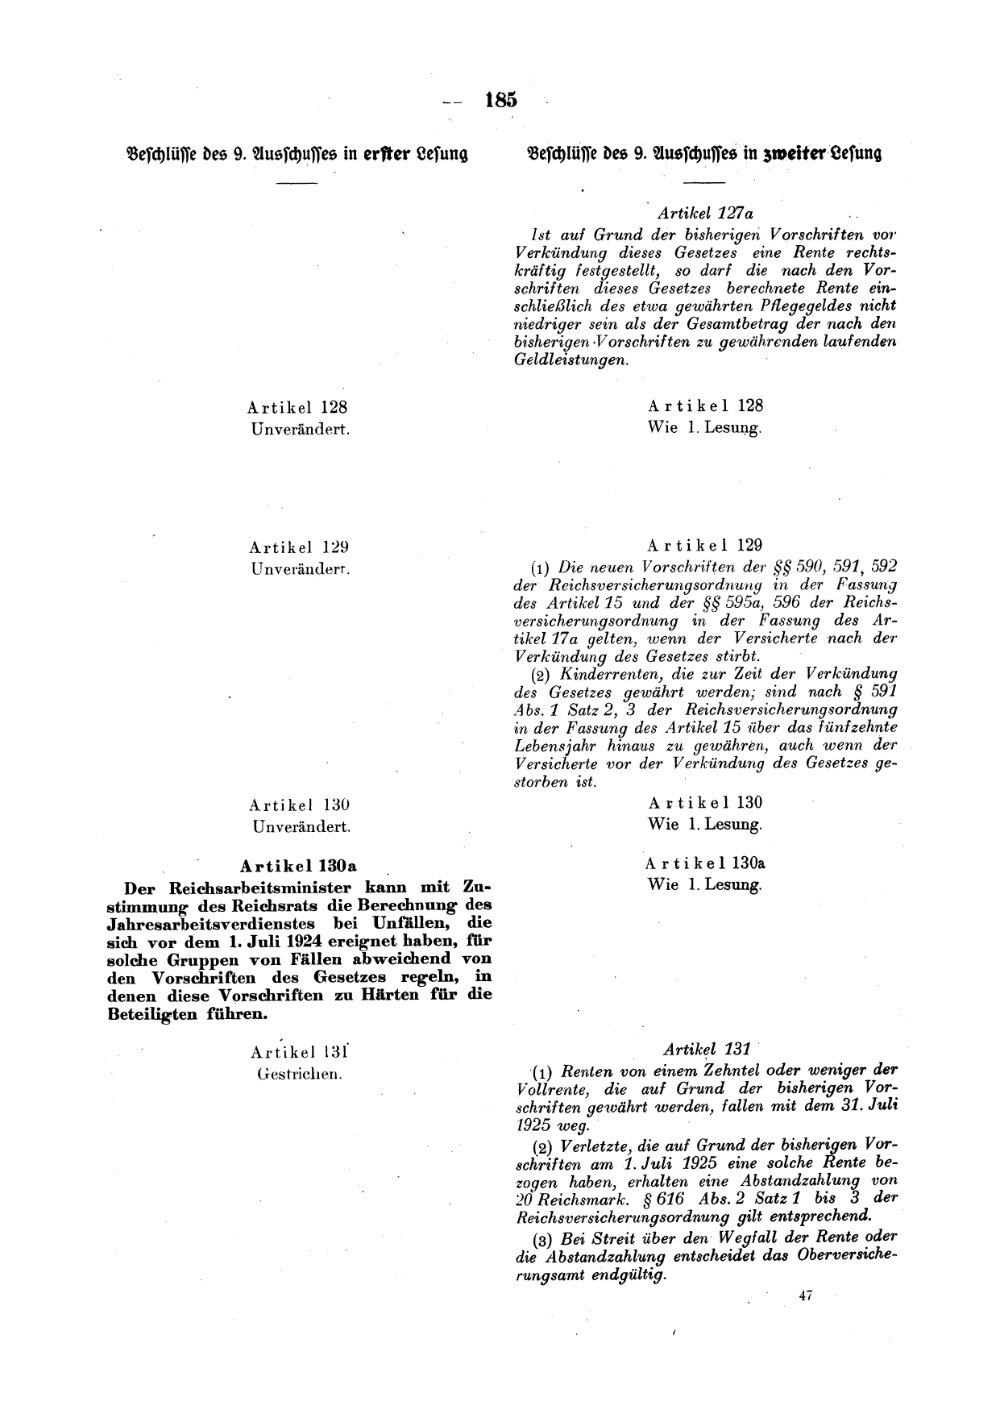 Scan of page 185